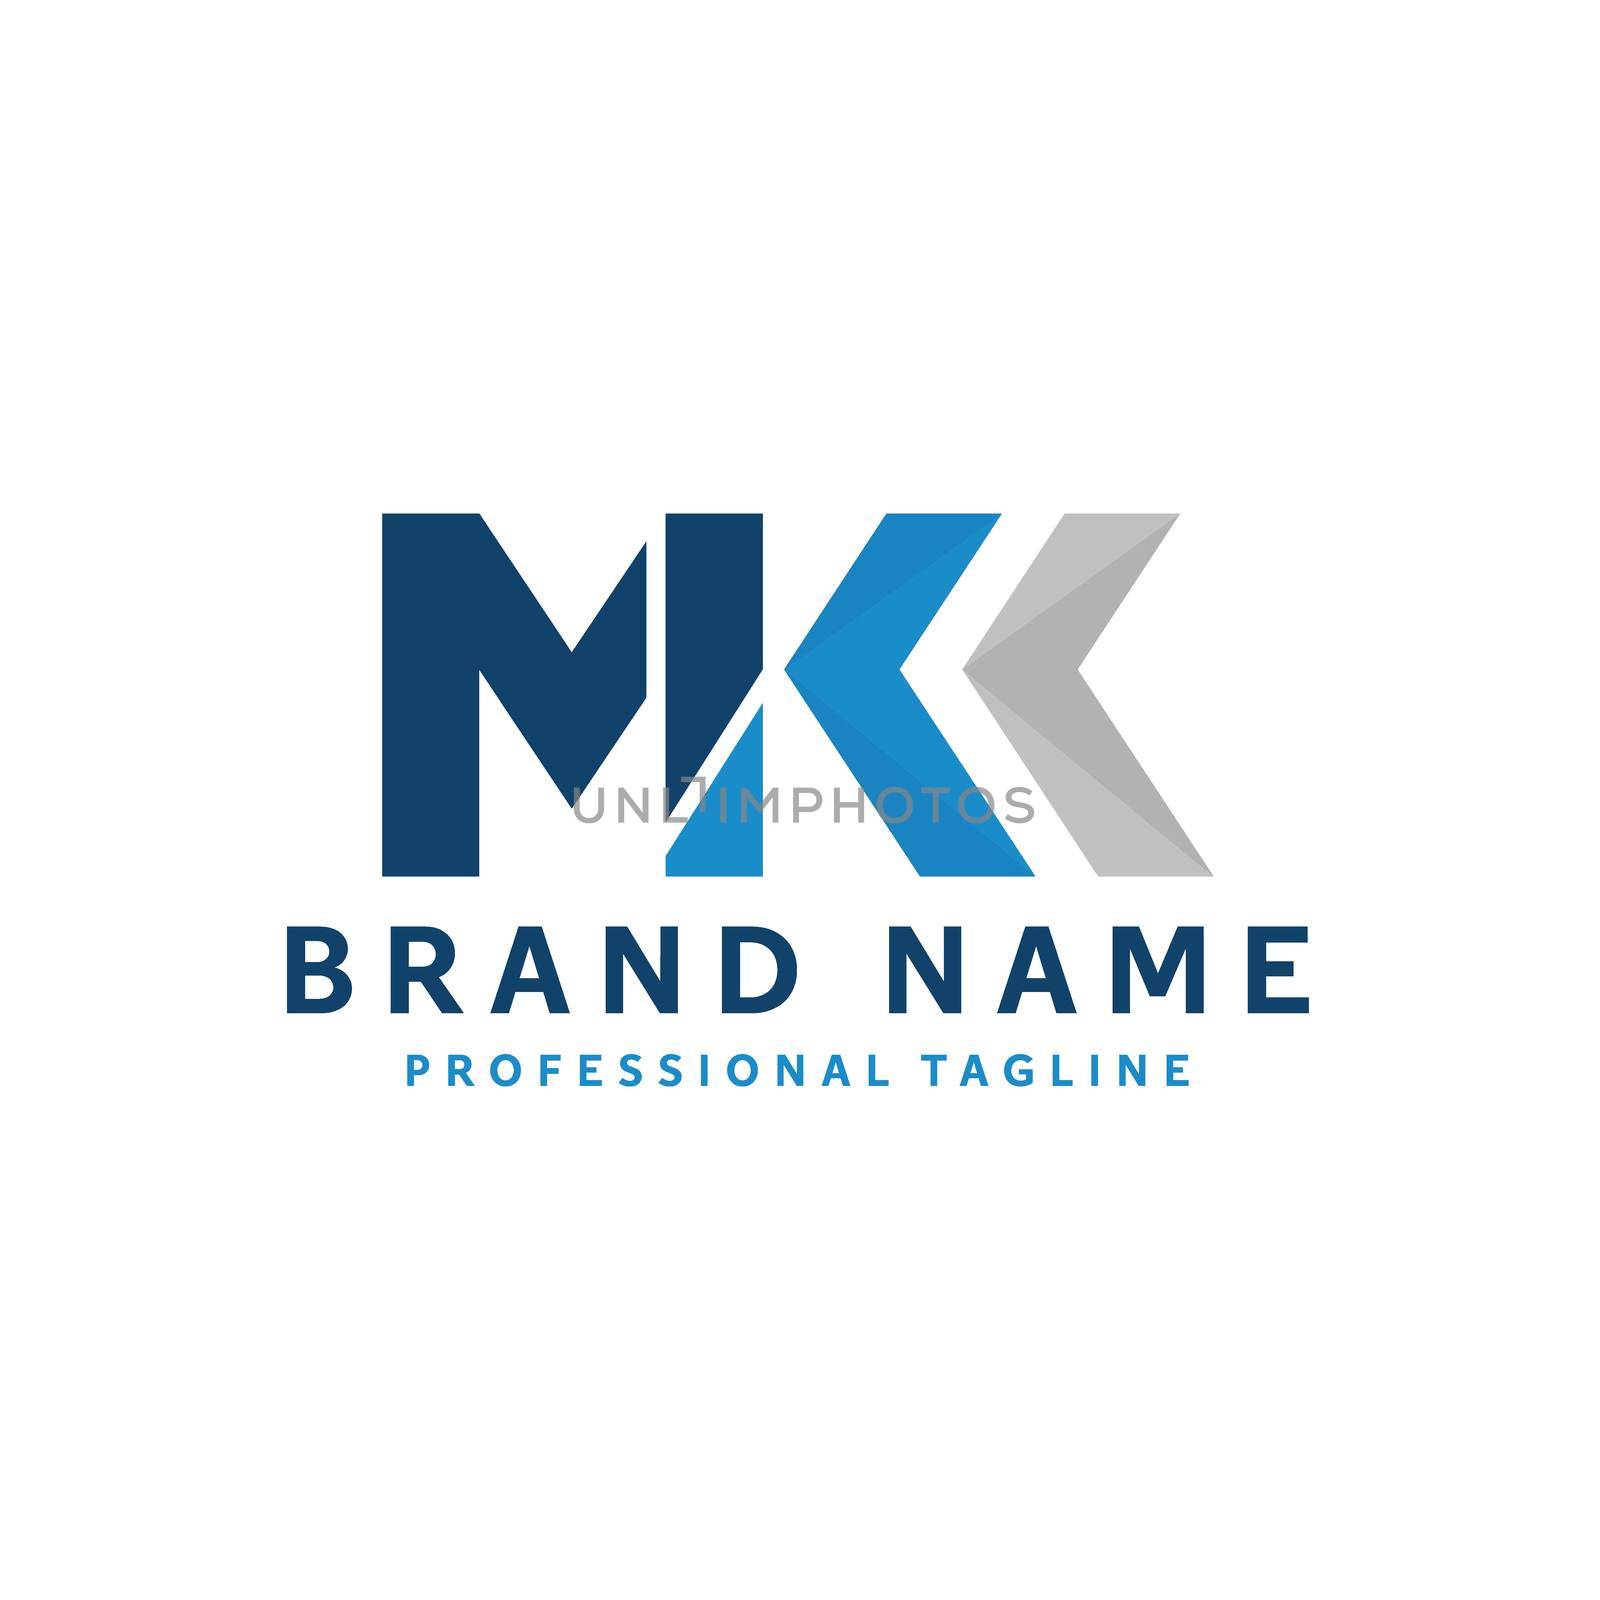 Clean initial vector Logo template with alphabet letters M and K in geometric logotype. Modern corporate identity